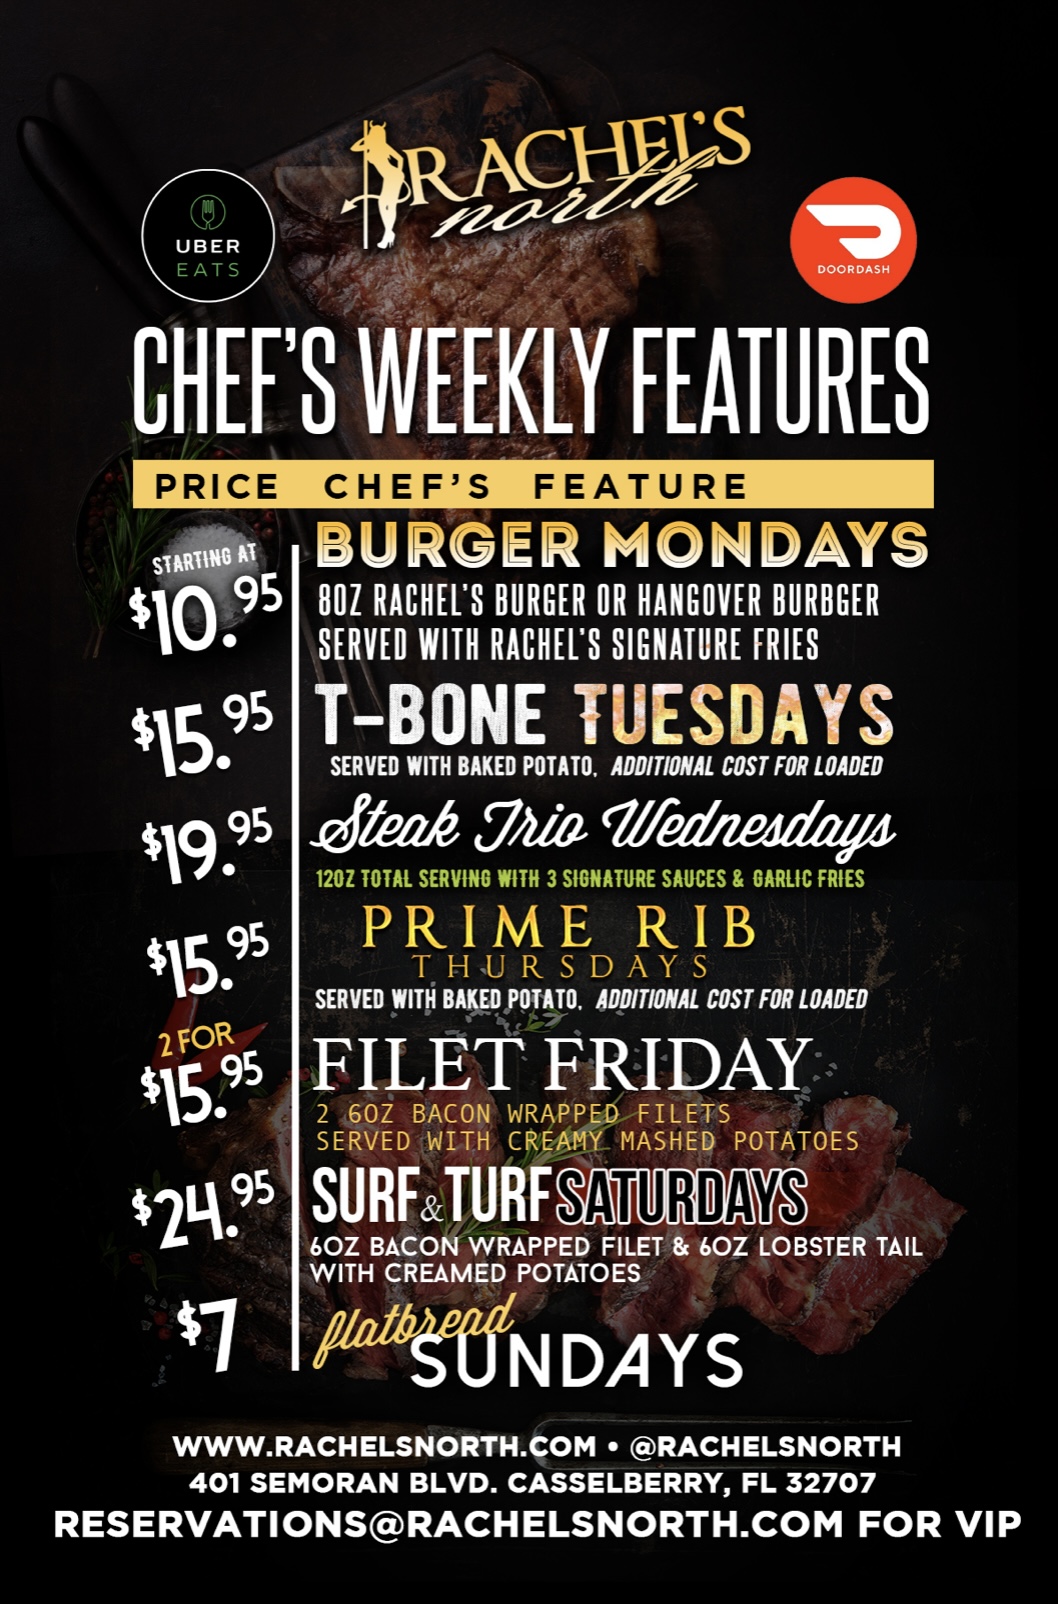 Rachel's North Mens Club and Steakhouse - Daily Specials